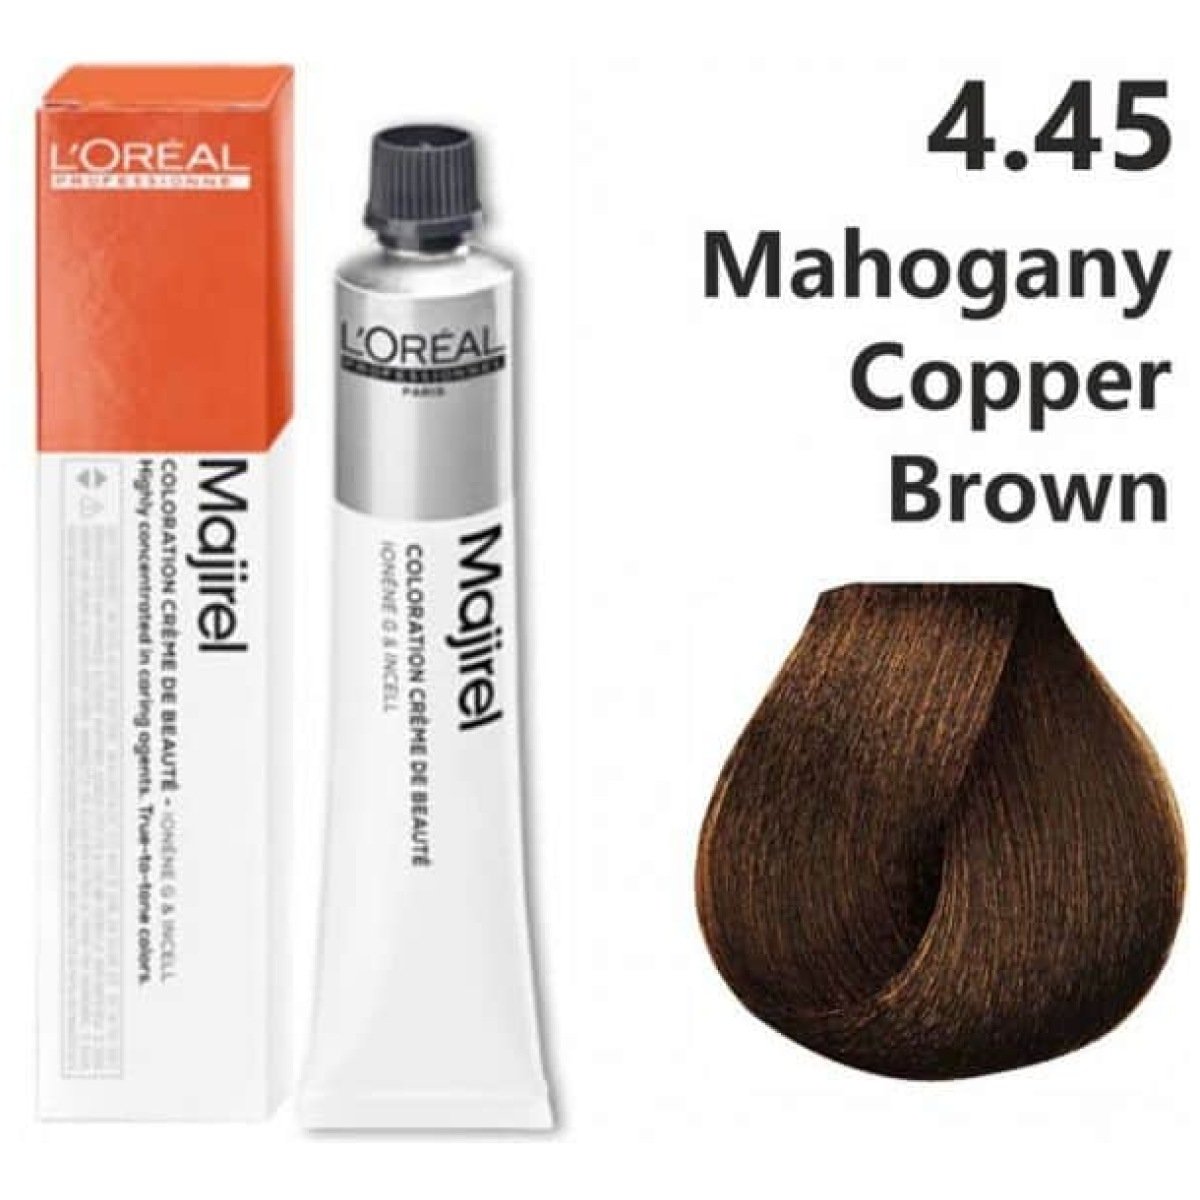 25 Copper Hair Color Ideas That Will Make You Want to Go Red